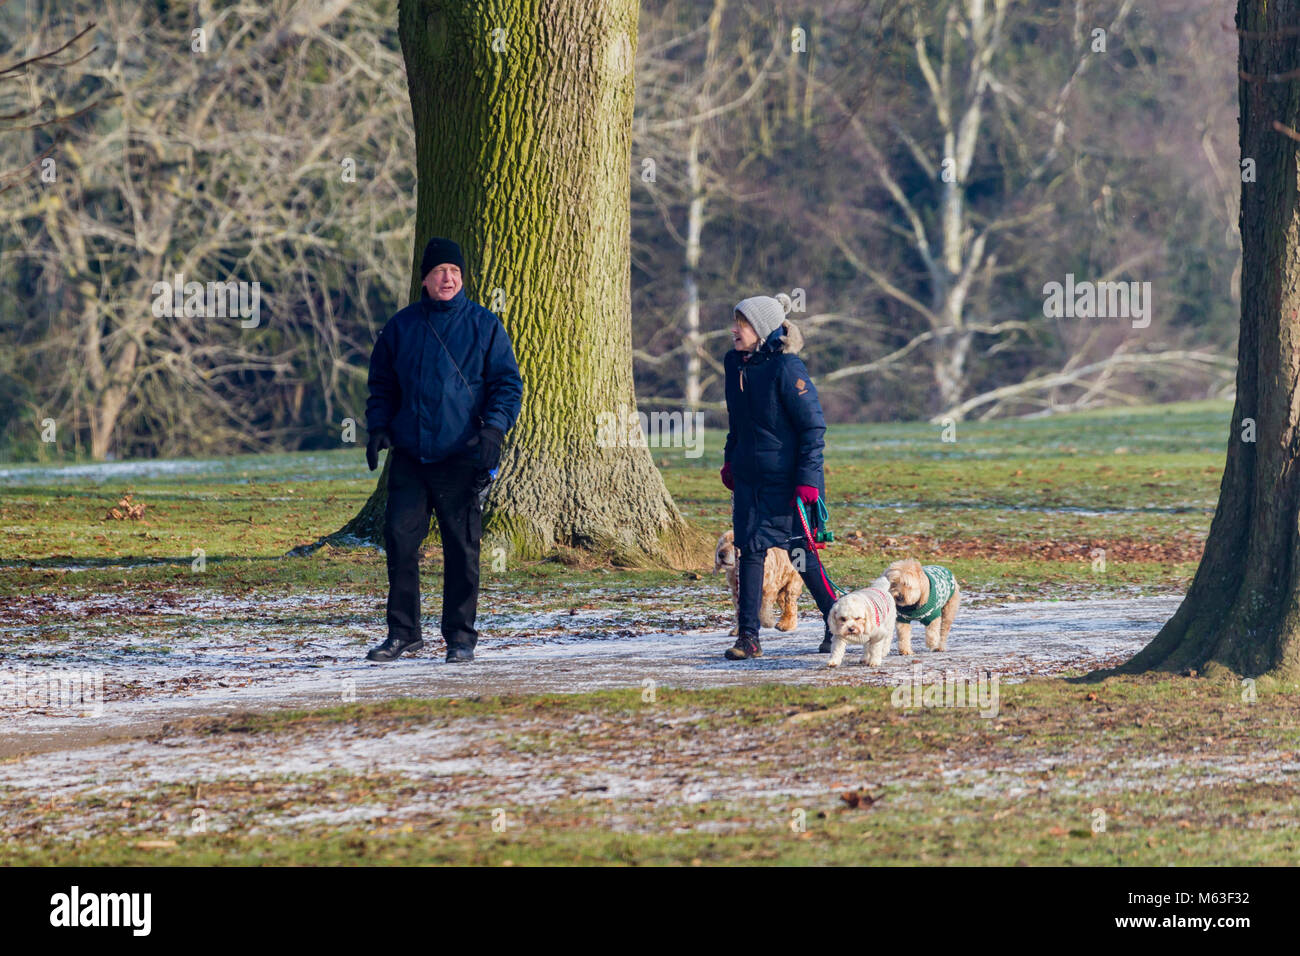 Northampton, England. 28th Feb, 2108. UK Weather: Temperatures at -2 this morning with a light dusting of snow for the people walking their dogs in Abington Park wrapped up against the bitterly cold breeze. Credit: Keith J Smith./Alamy Live News Stock Photo